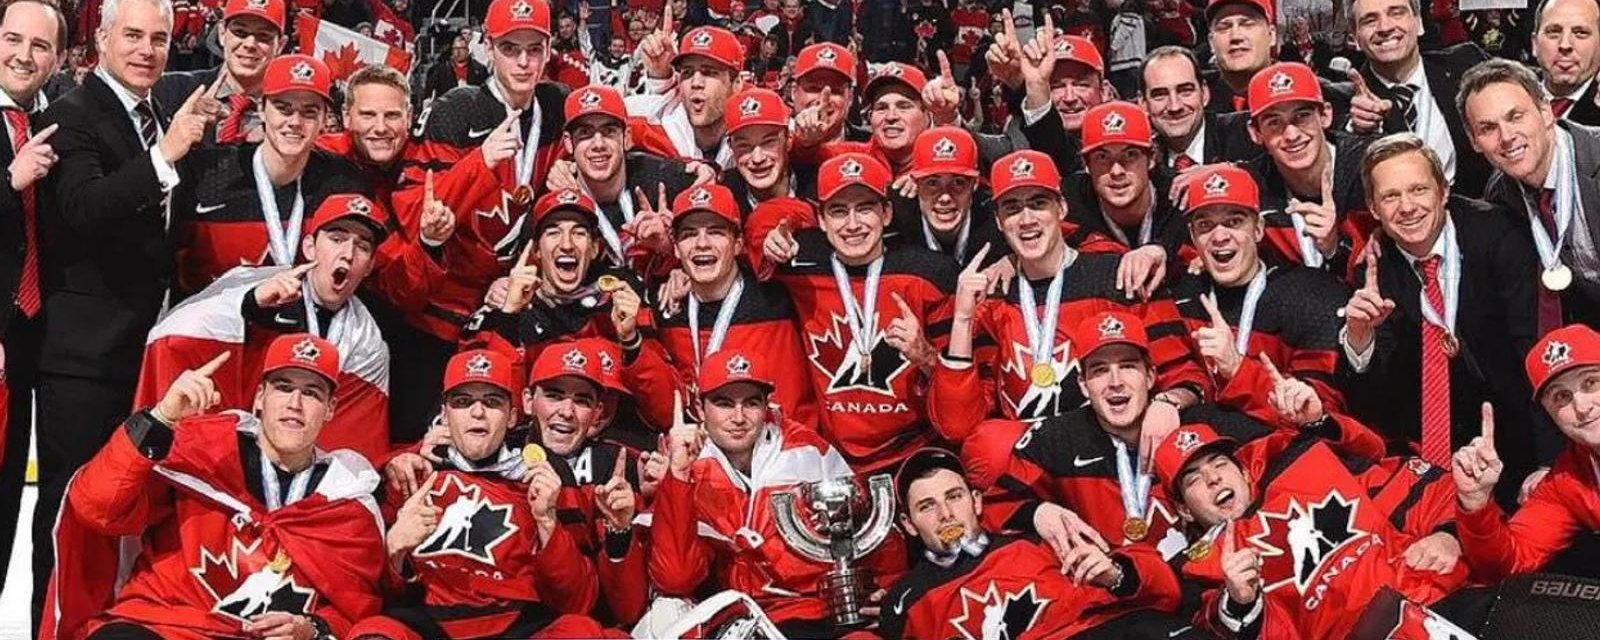 5 players from 2018 WJC Team Canada told to surrender to London police